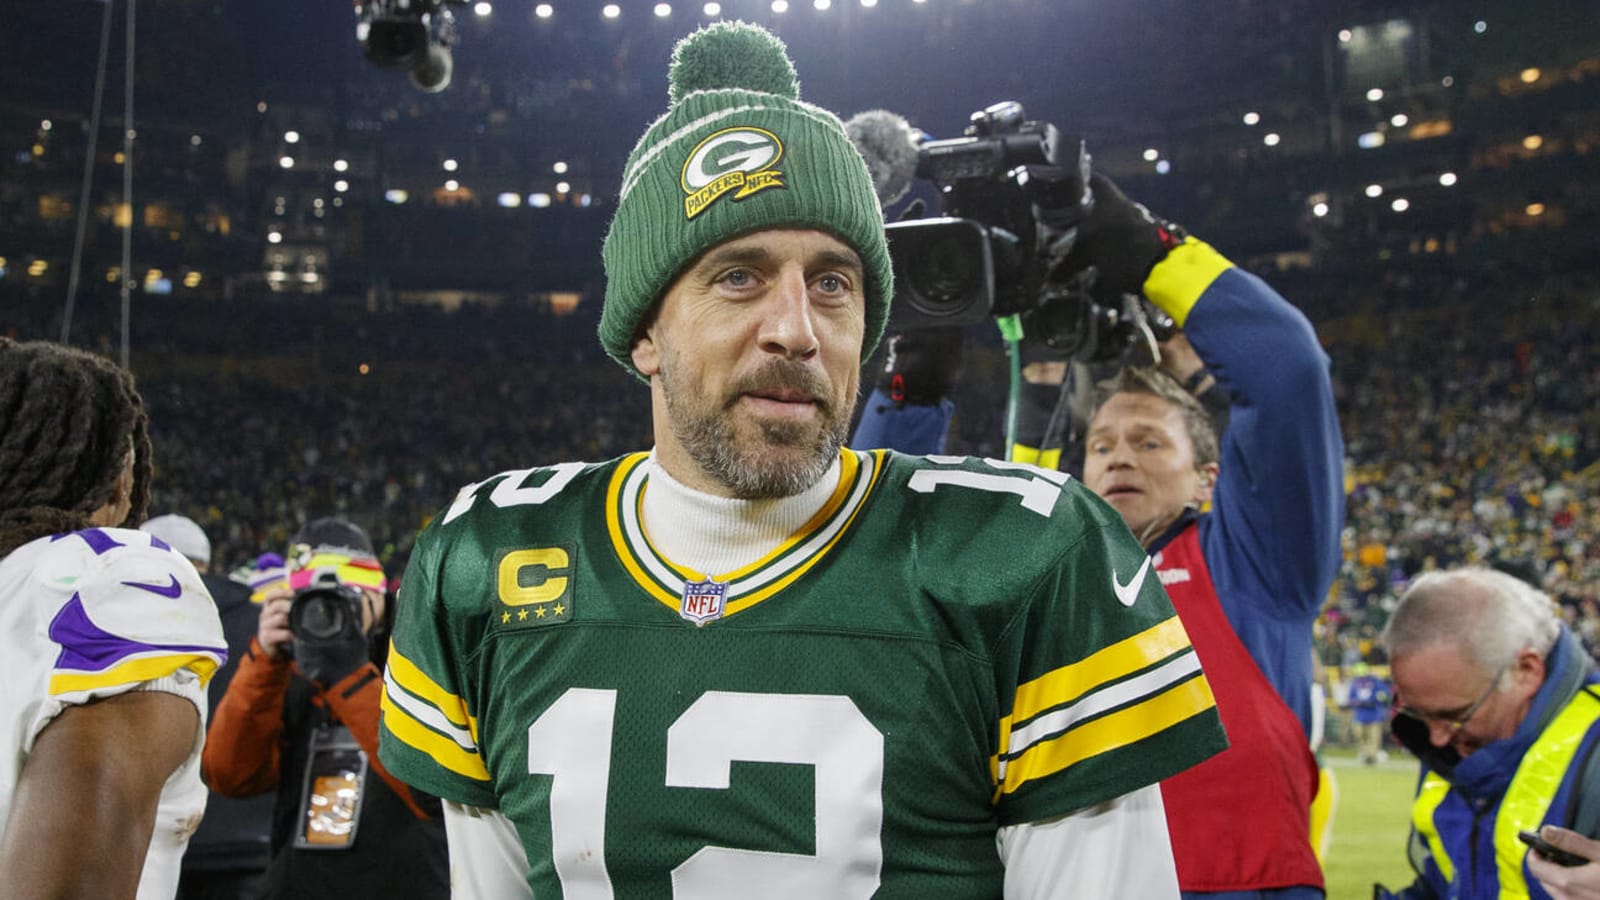 Three possible trade destinations for Packers QB Aaron Rodgers